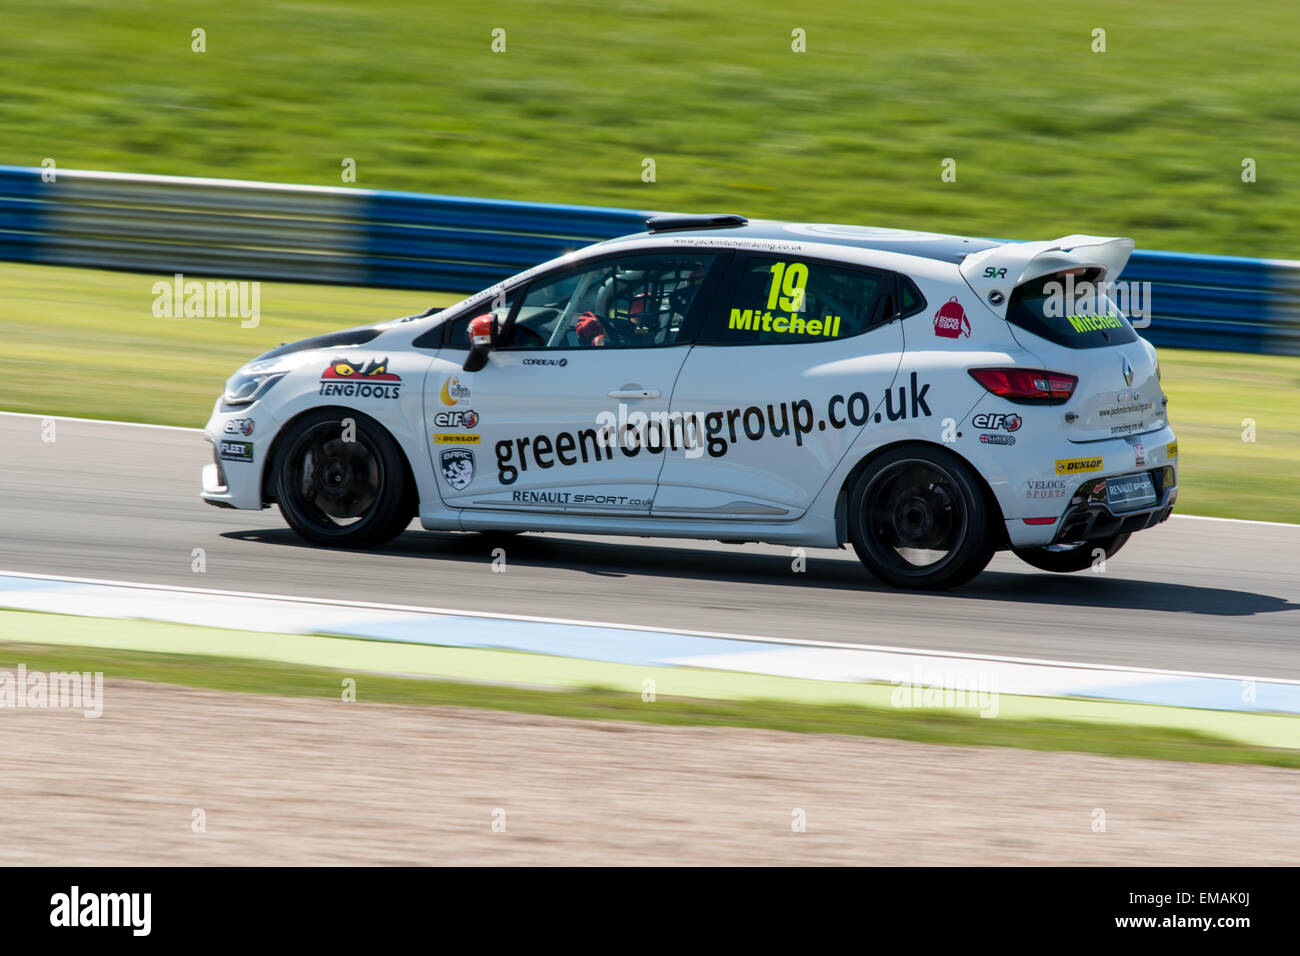 Donington Park, Donington Castle, UK. 18th April, 2015. Jack Mitchell and SV Racing Renault Clio drives during the Renault UK Clio Cup Practice session at Donington Park. Credit:  Gergo Toth/Alamy Live News Stock Photo